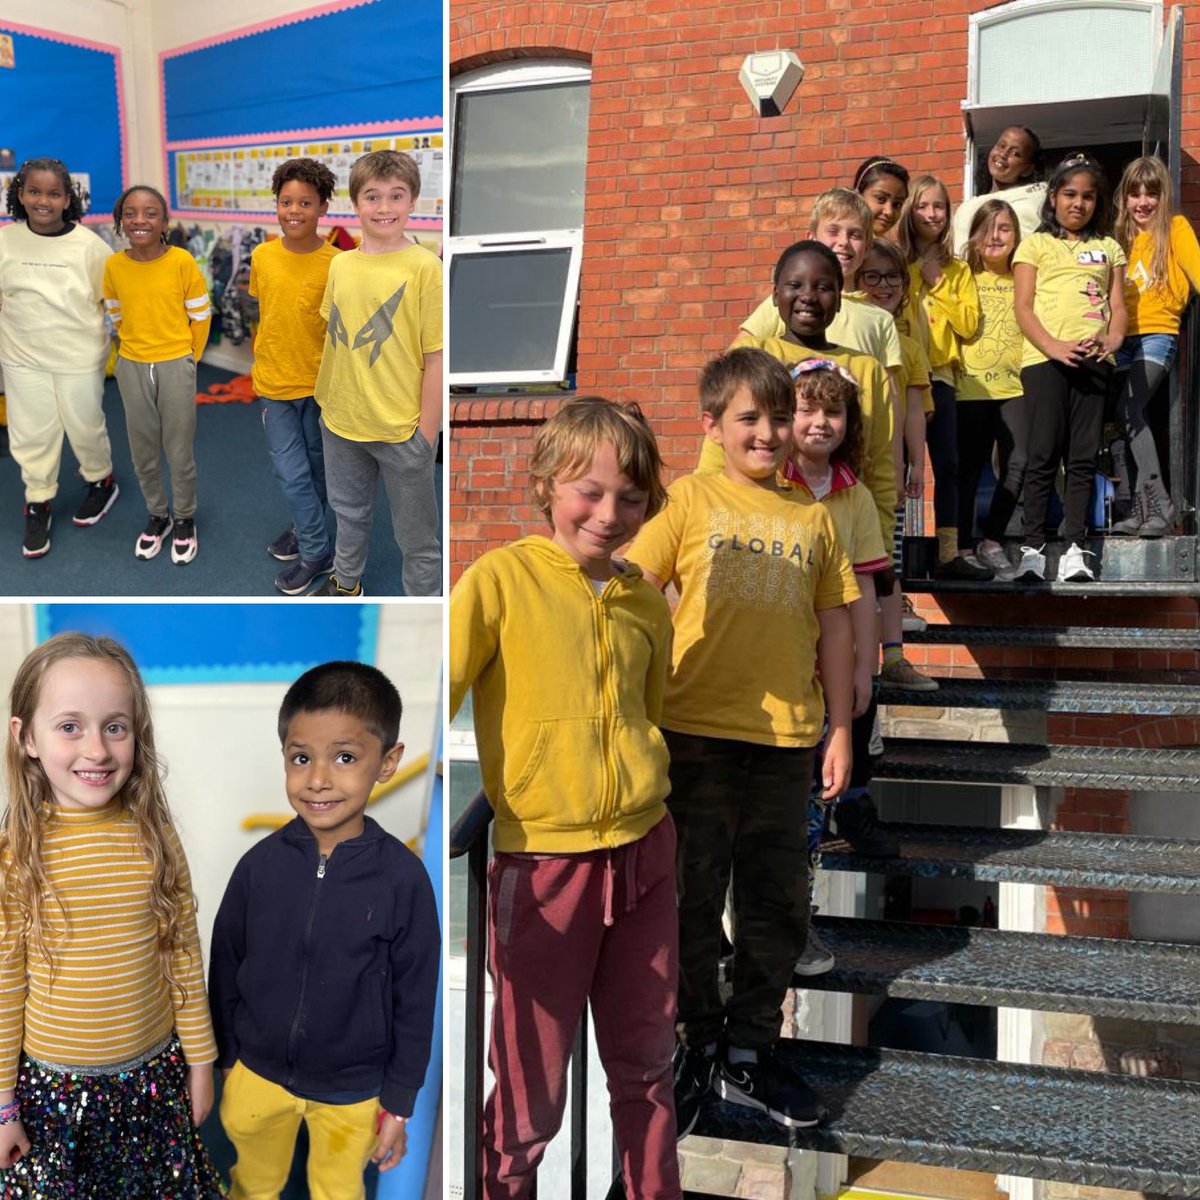 Our school was filled with splashes of yellow as we celebrated #HelloYellow as part of World Mental Health Day this week.

Thank you to everyone for all of your brilliant efforts and donations in support of Young Minds charity.

#WeAreLocalCitizens #WeAreGlobalCitizens